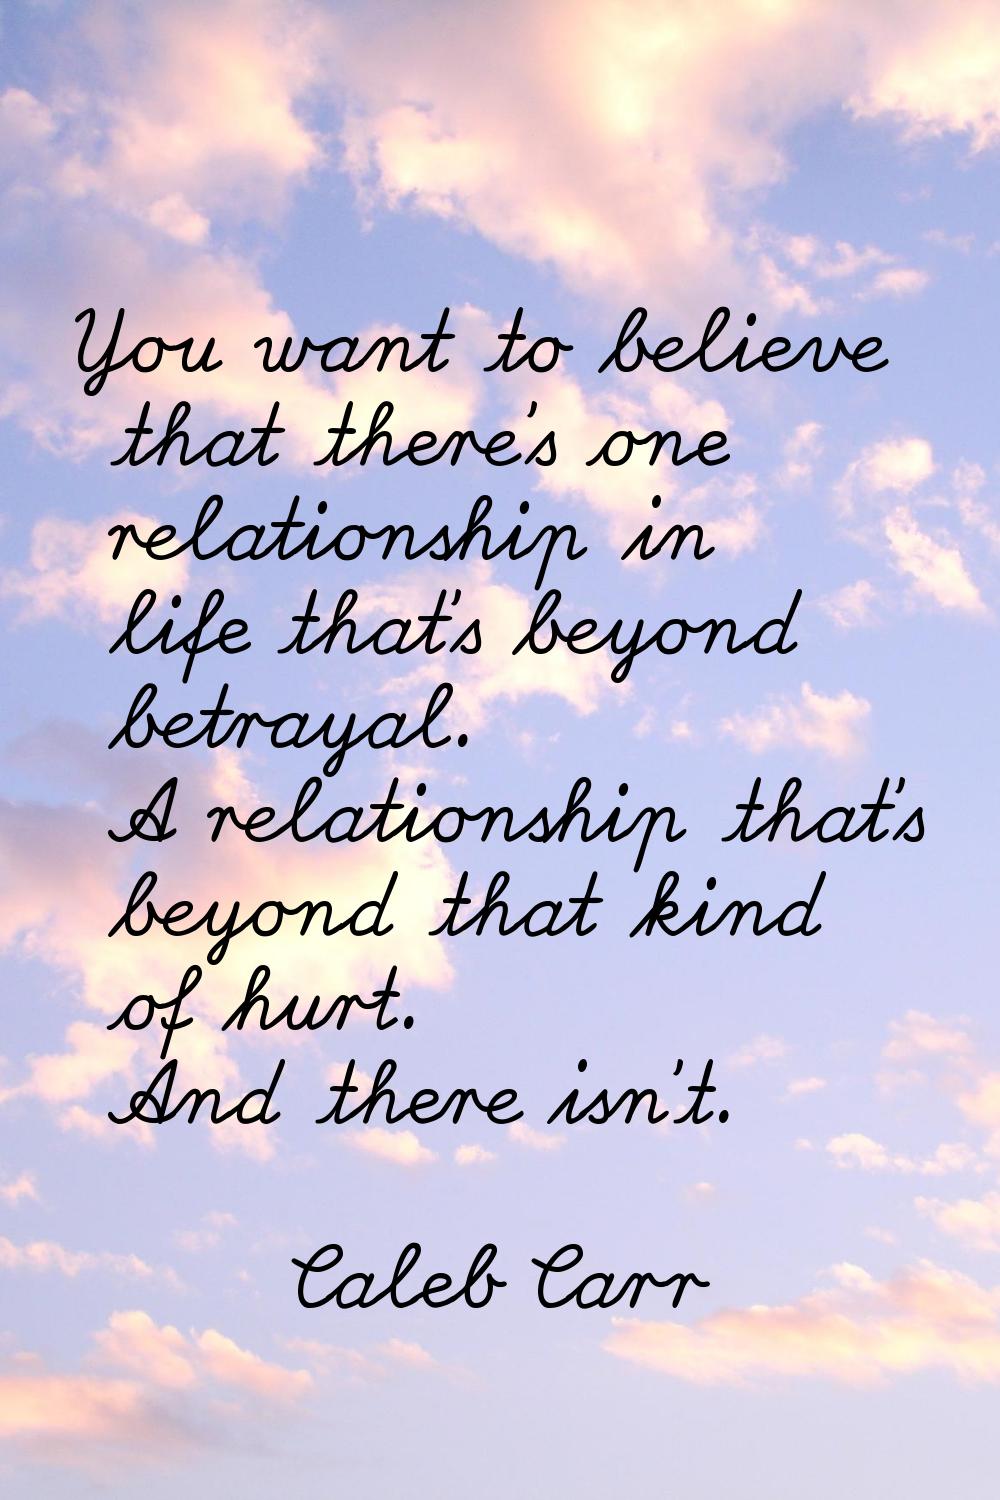 You want to believe that there's one relationship in life that's beyond betrayal. A relationship th